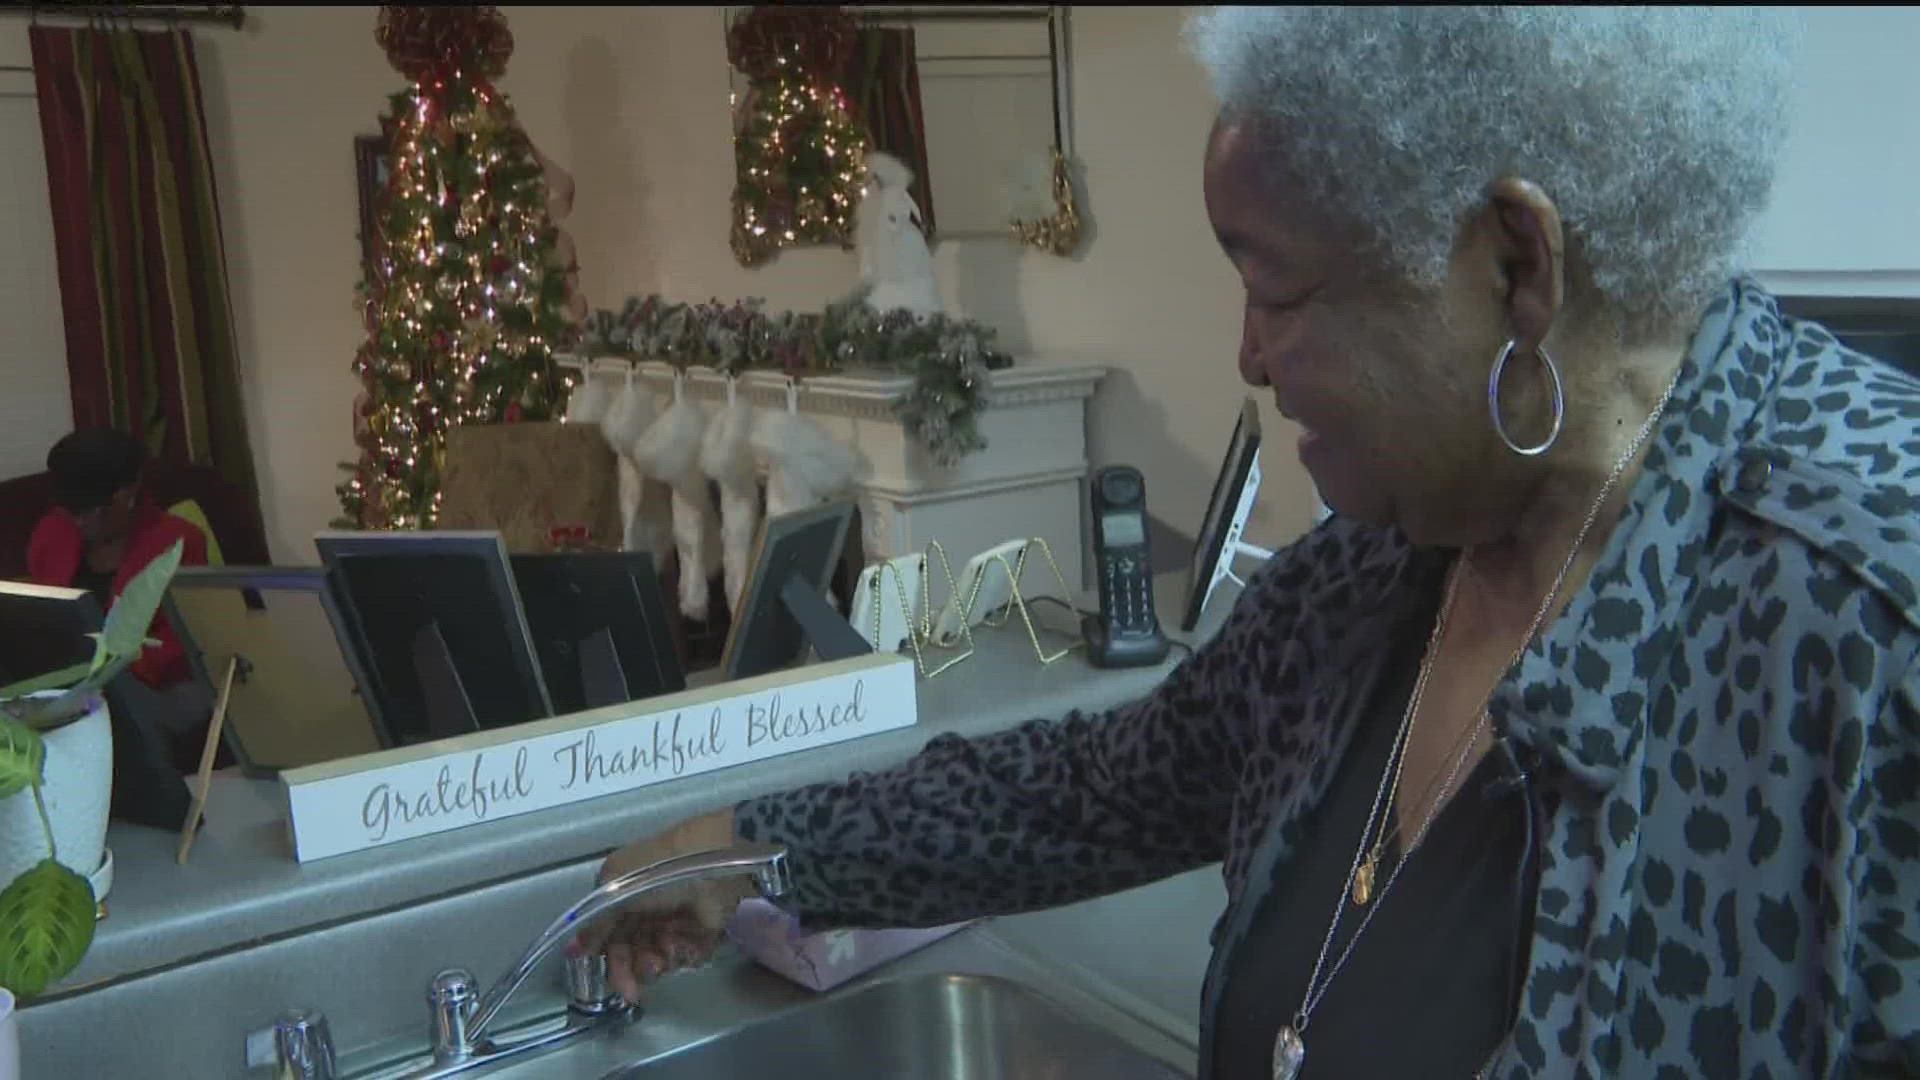 Several residents of a DeKalb County senior citizen community have been without water since Christmas Eve.